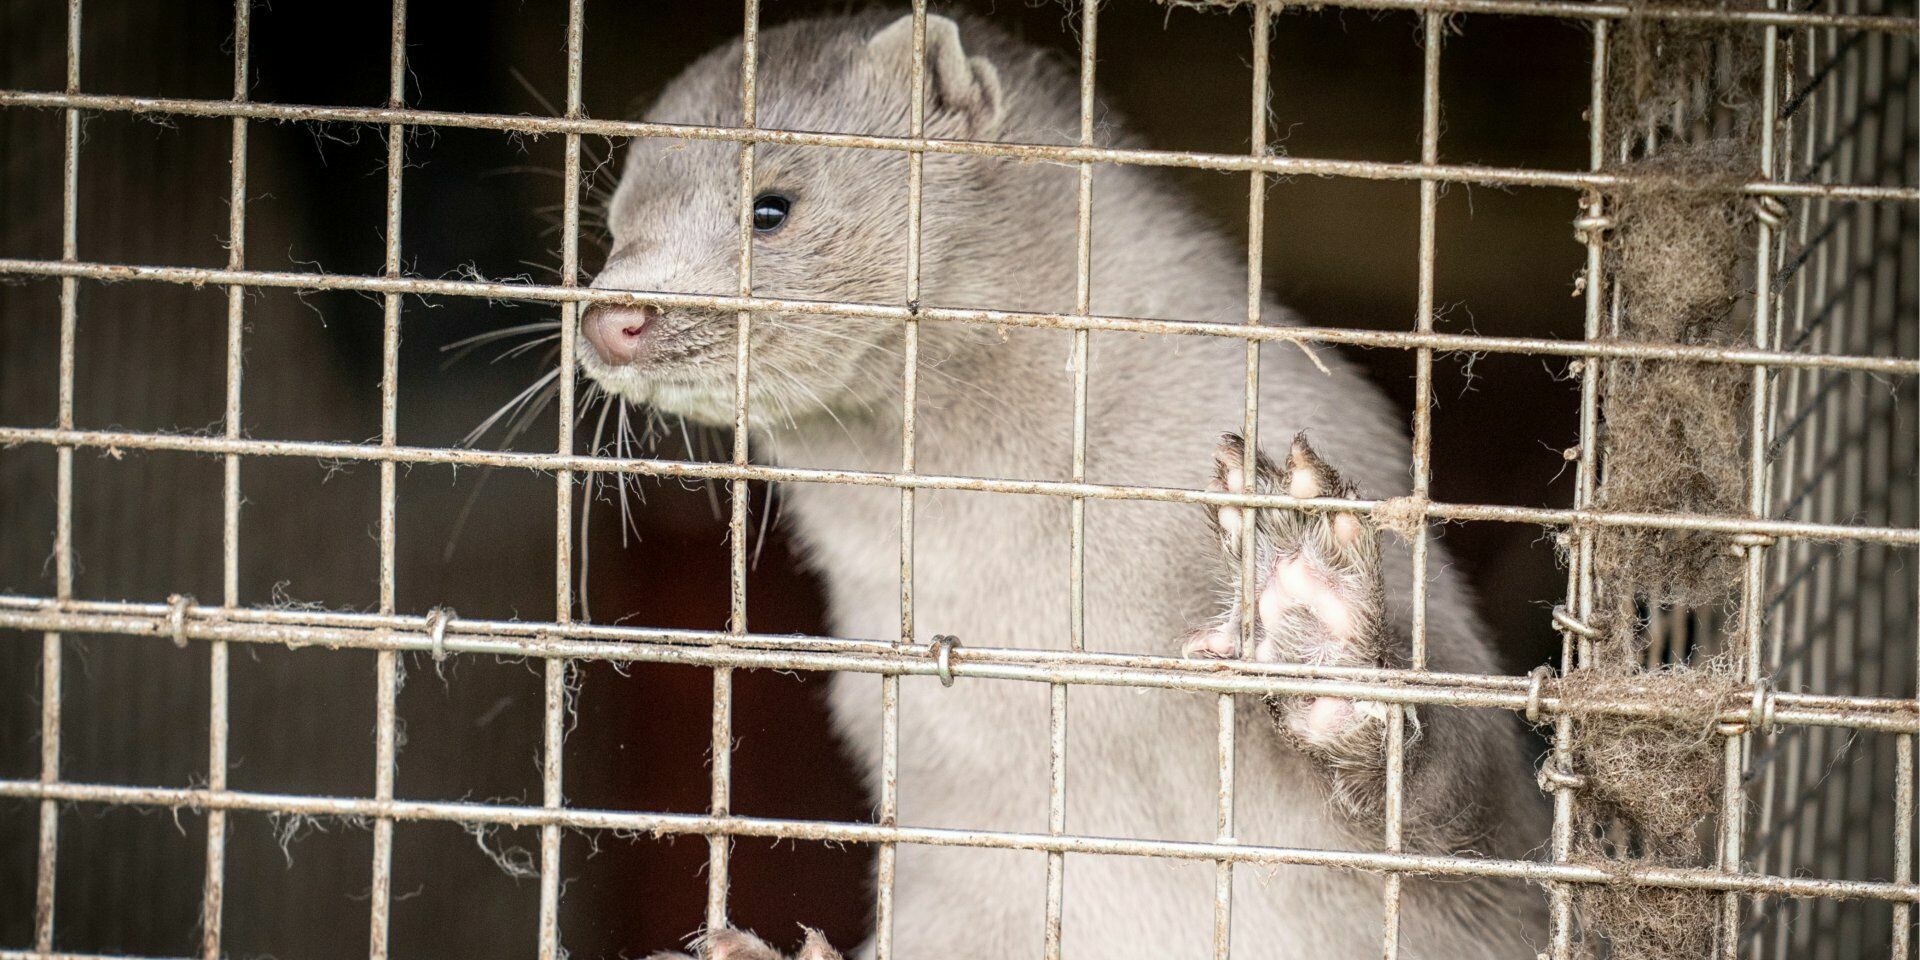 Question of the day: who will take pity on 17 million Danish minks doomed to death?